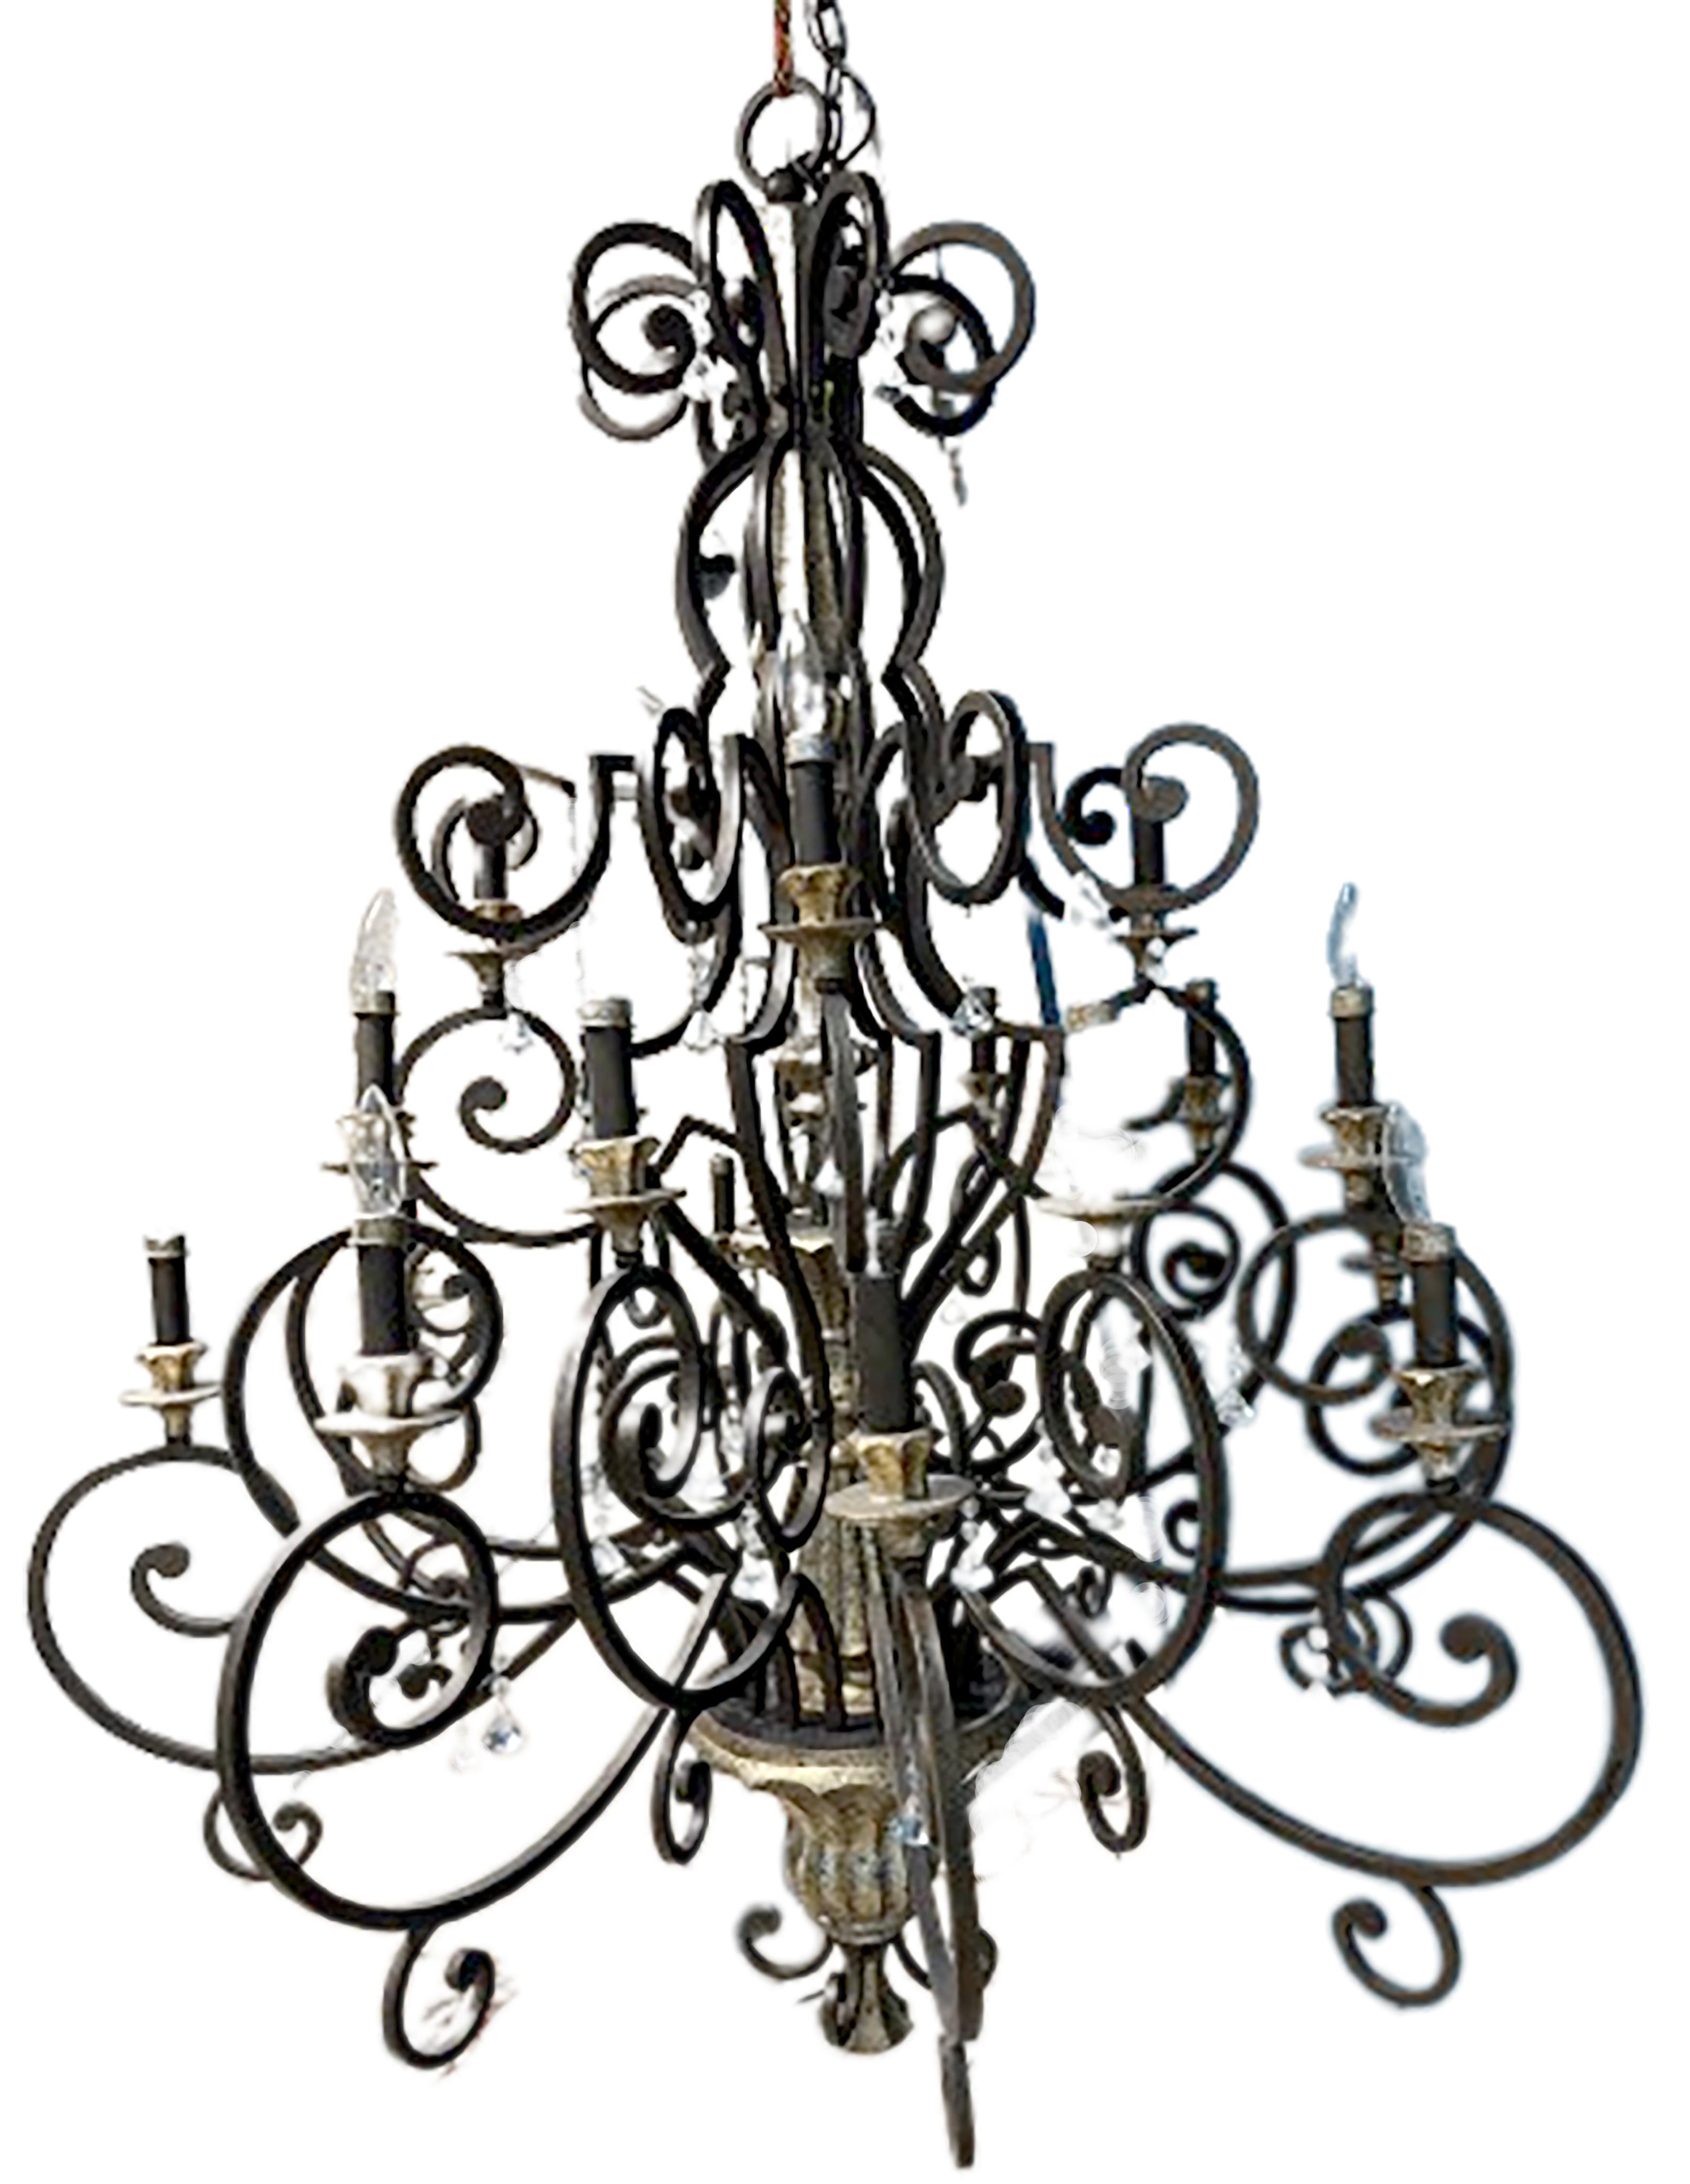 A handsome Quoizel Marquette 3-Tier Chandelier handmade chandelier. Made in a unique Heirloom finish that combines bronze and silver accents. Iron with French curve shapes rounding out the body of the piece. Contains a multitude of Hand cut crystal